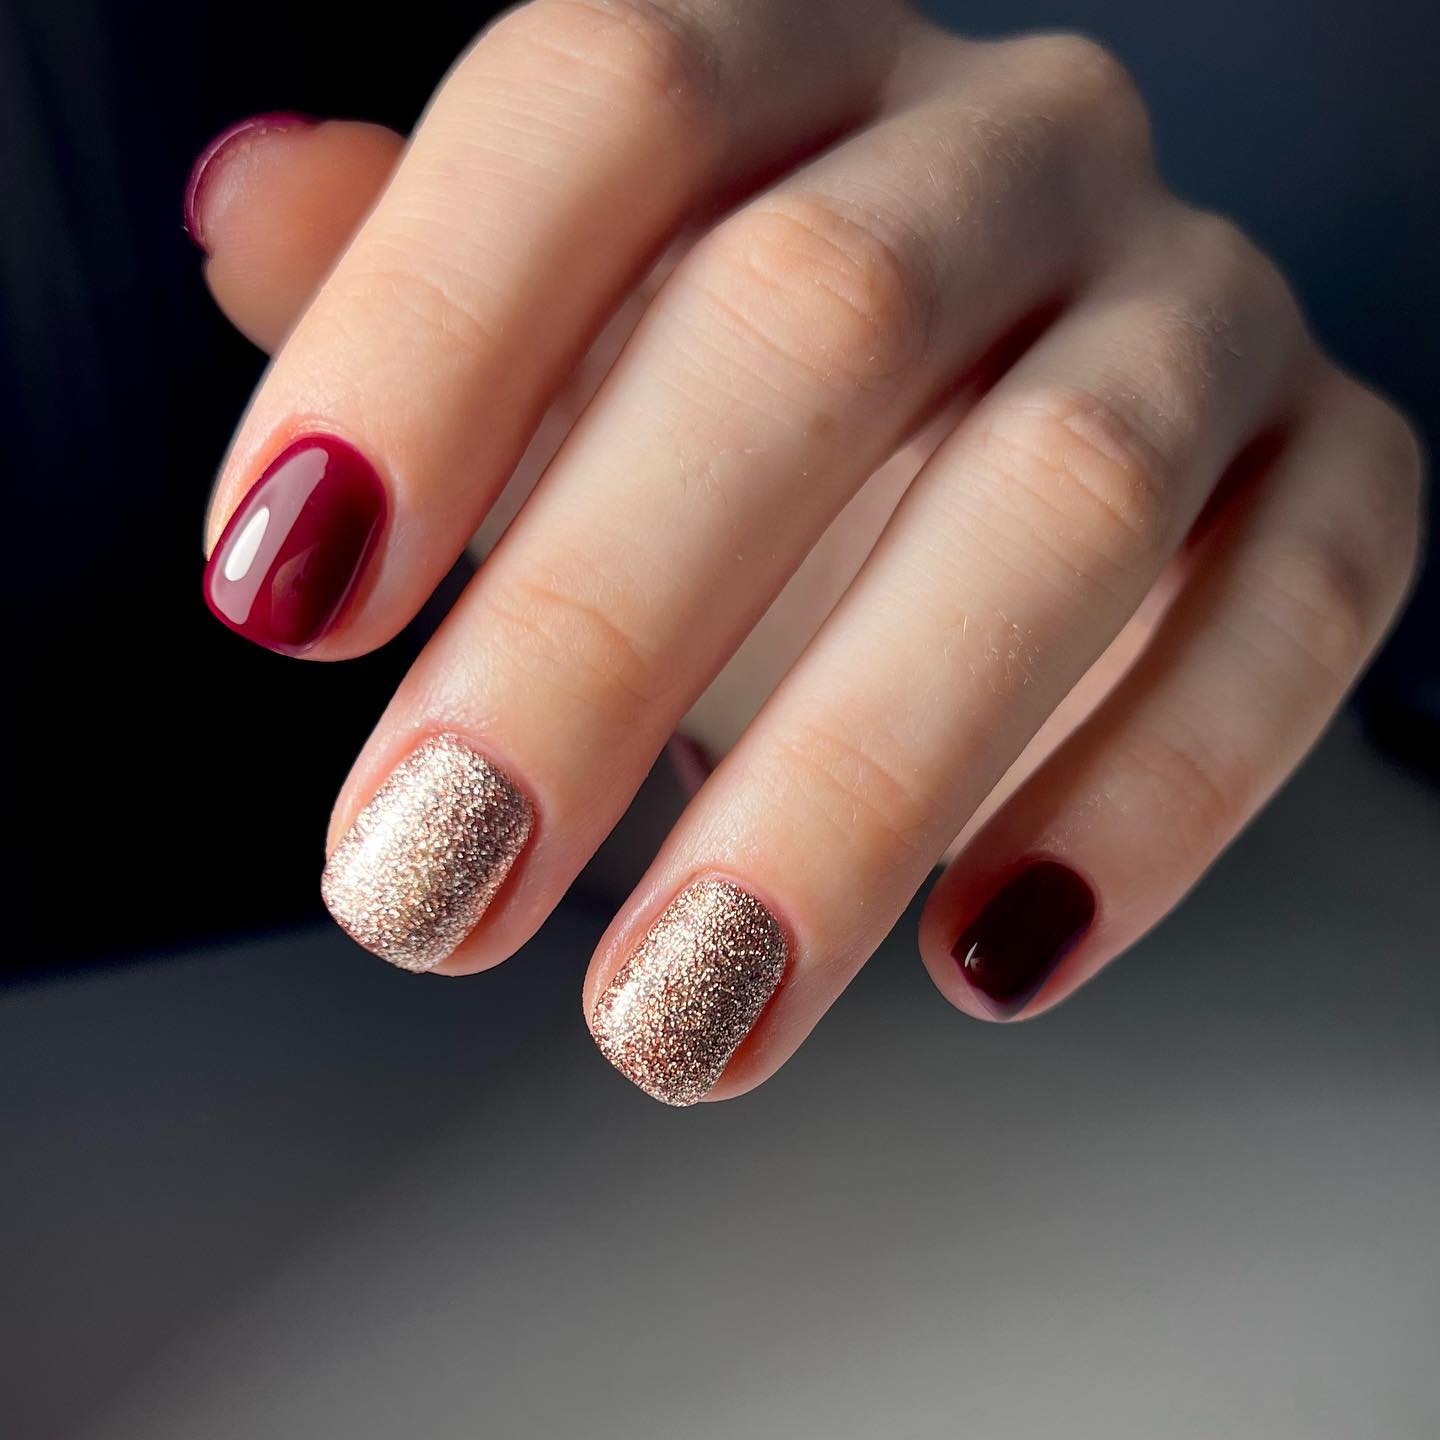 Burgundy Matte Nails To Try This Season - Nail Designs Journal